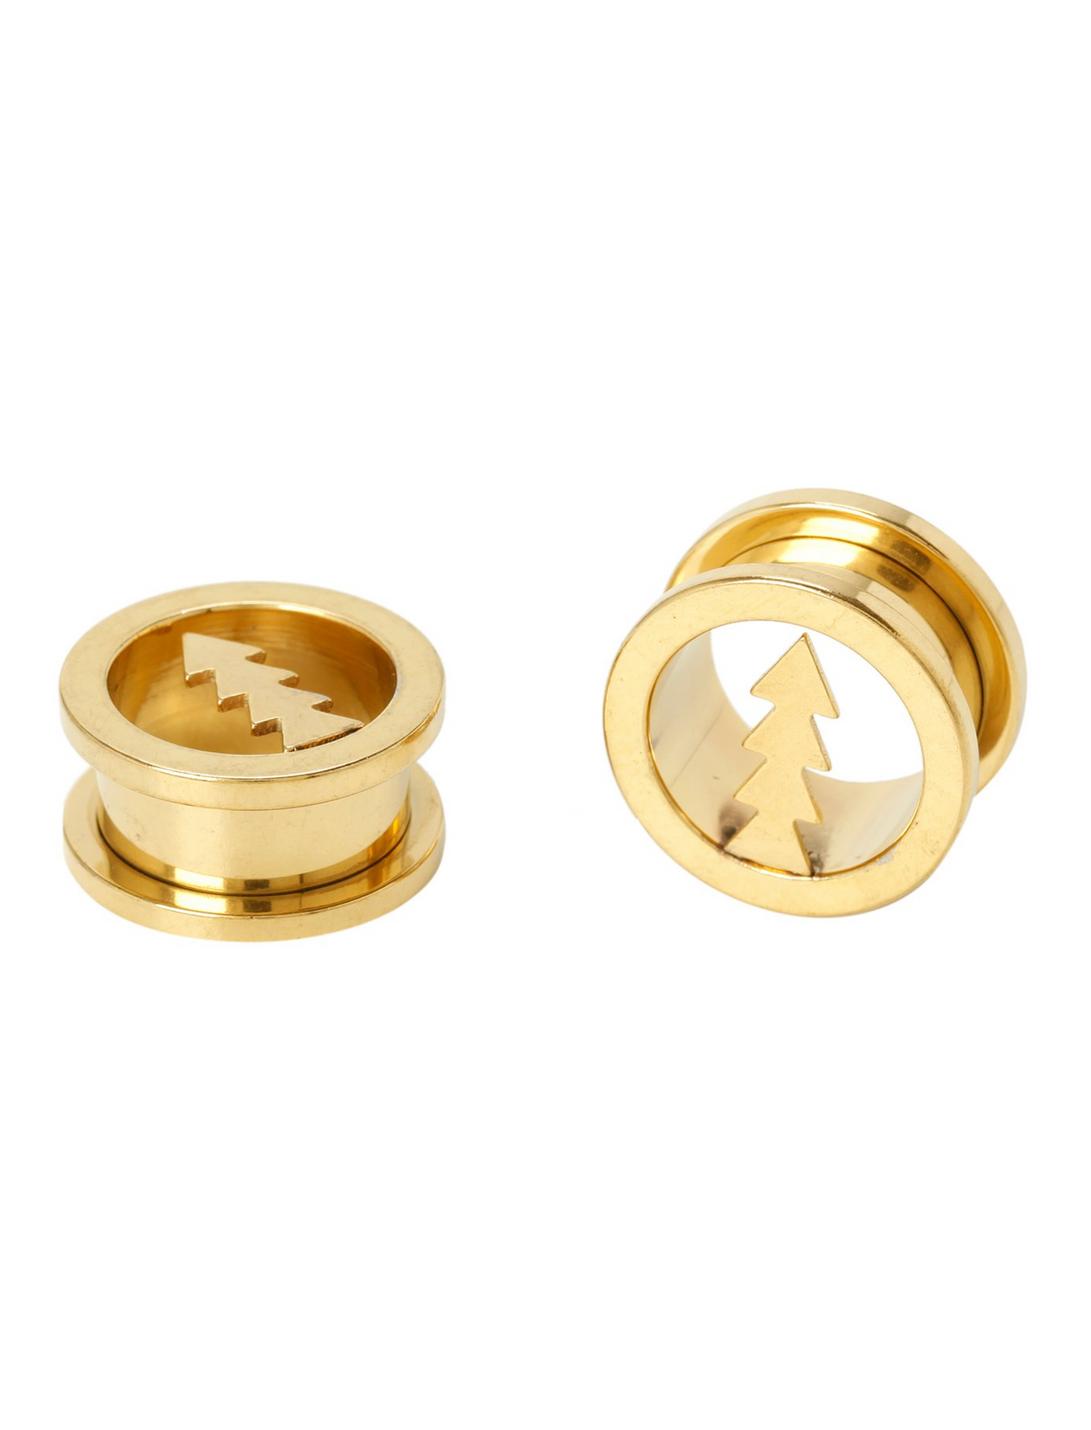 Steel Gold Triangle Cut-Out Spool Plug 2 Pack, , hi-res